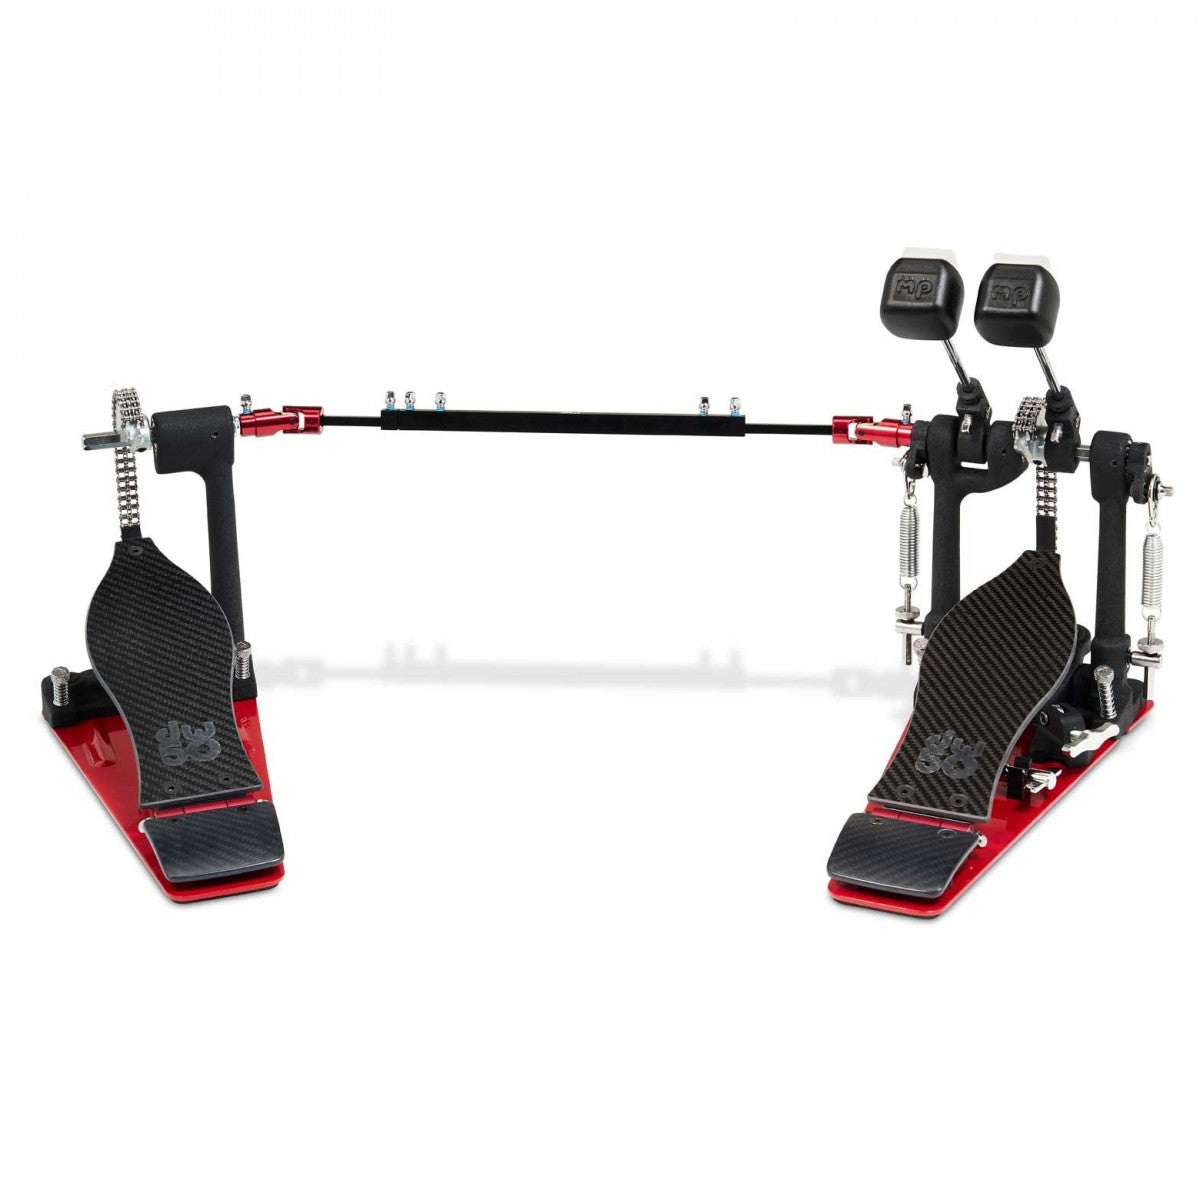 DW 50th Anniversary 5000 Series Double Bass Drum Pedal